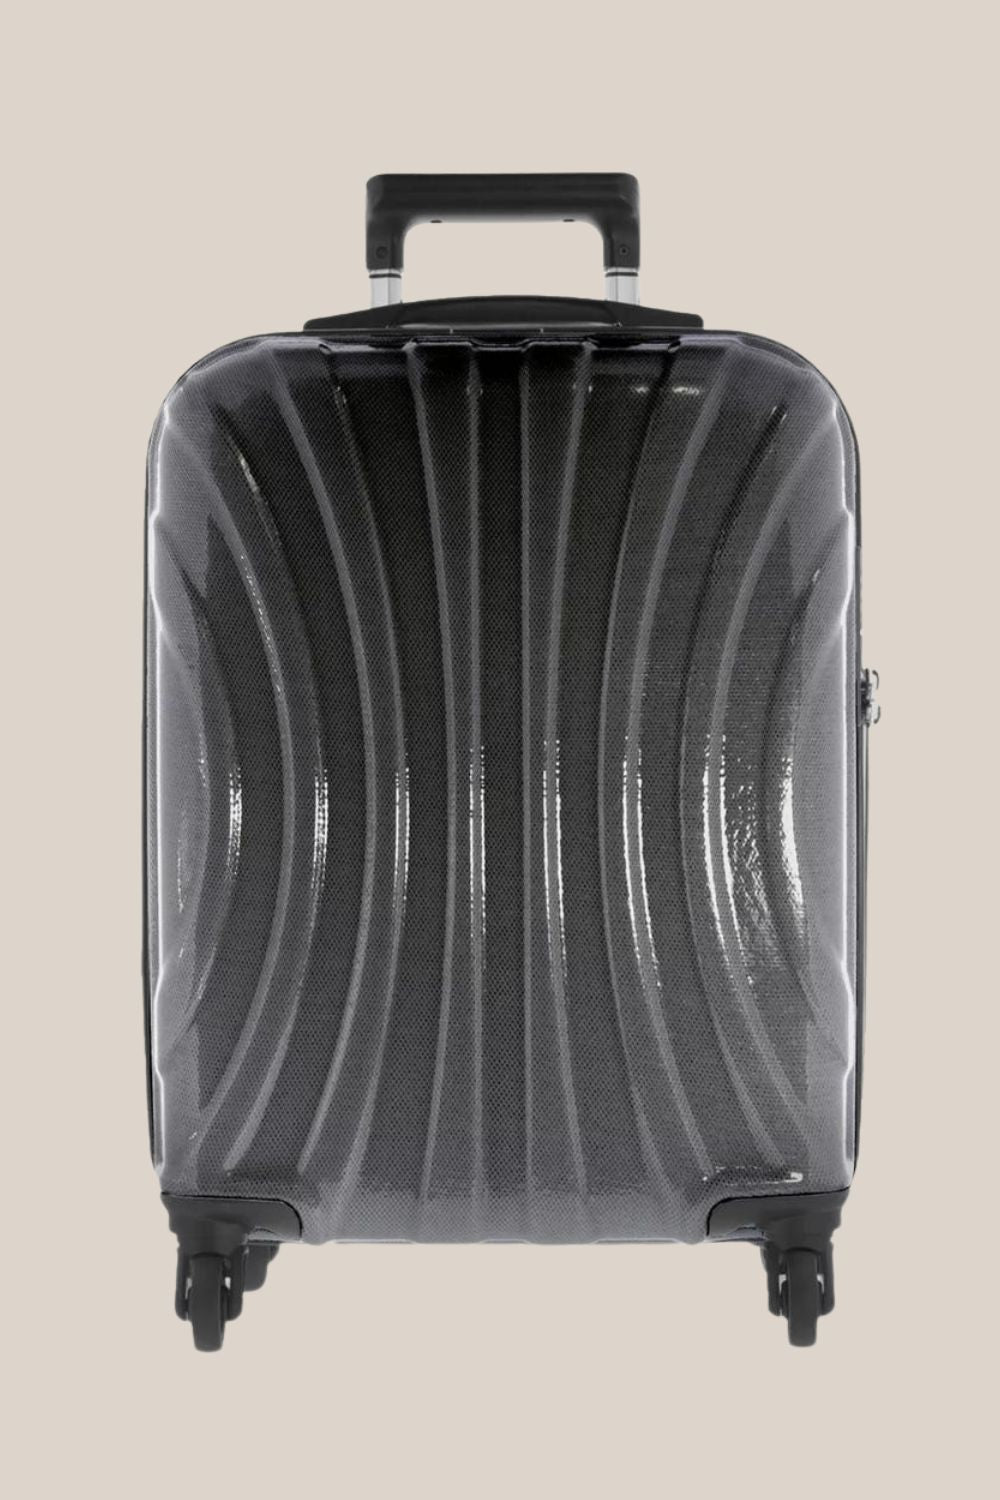 Cobb & Co Adelaide Hard Suitcase 28IN